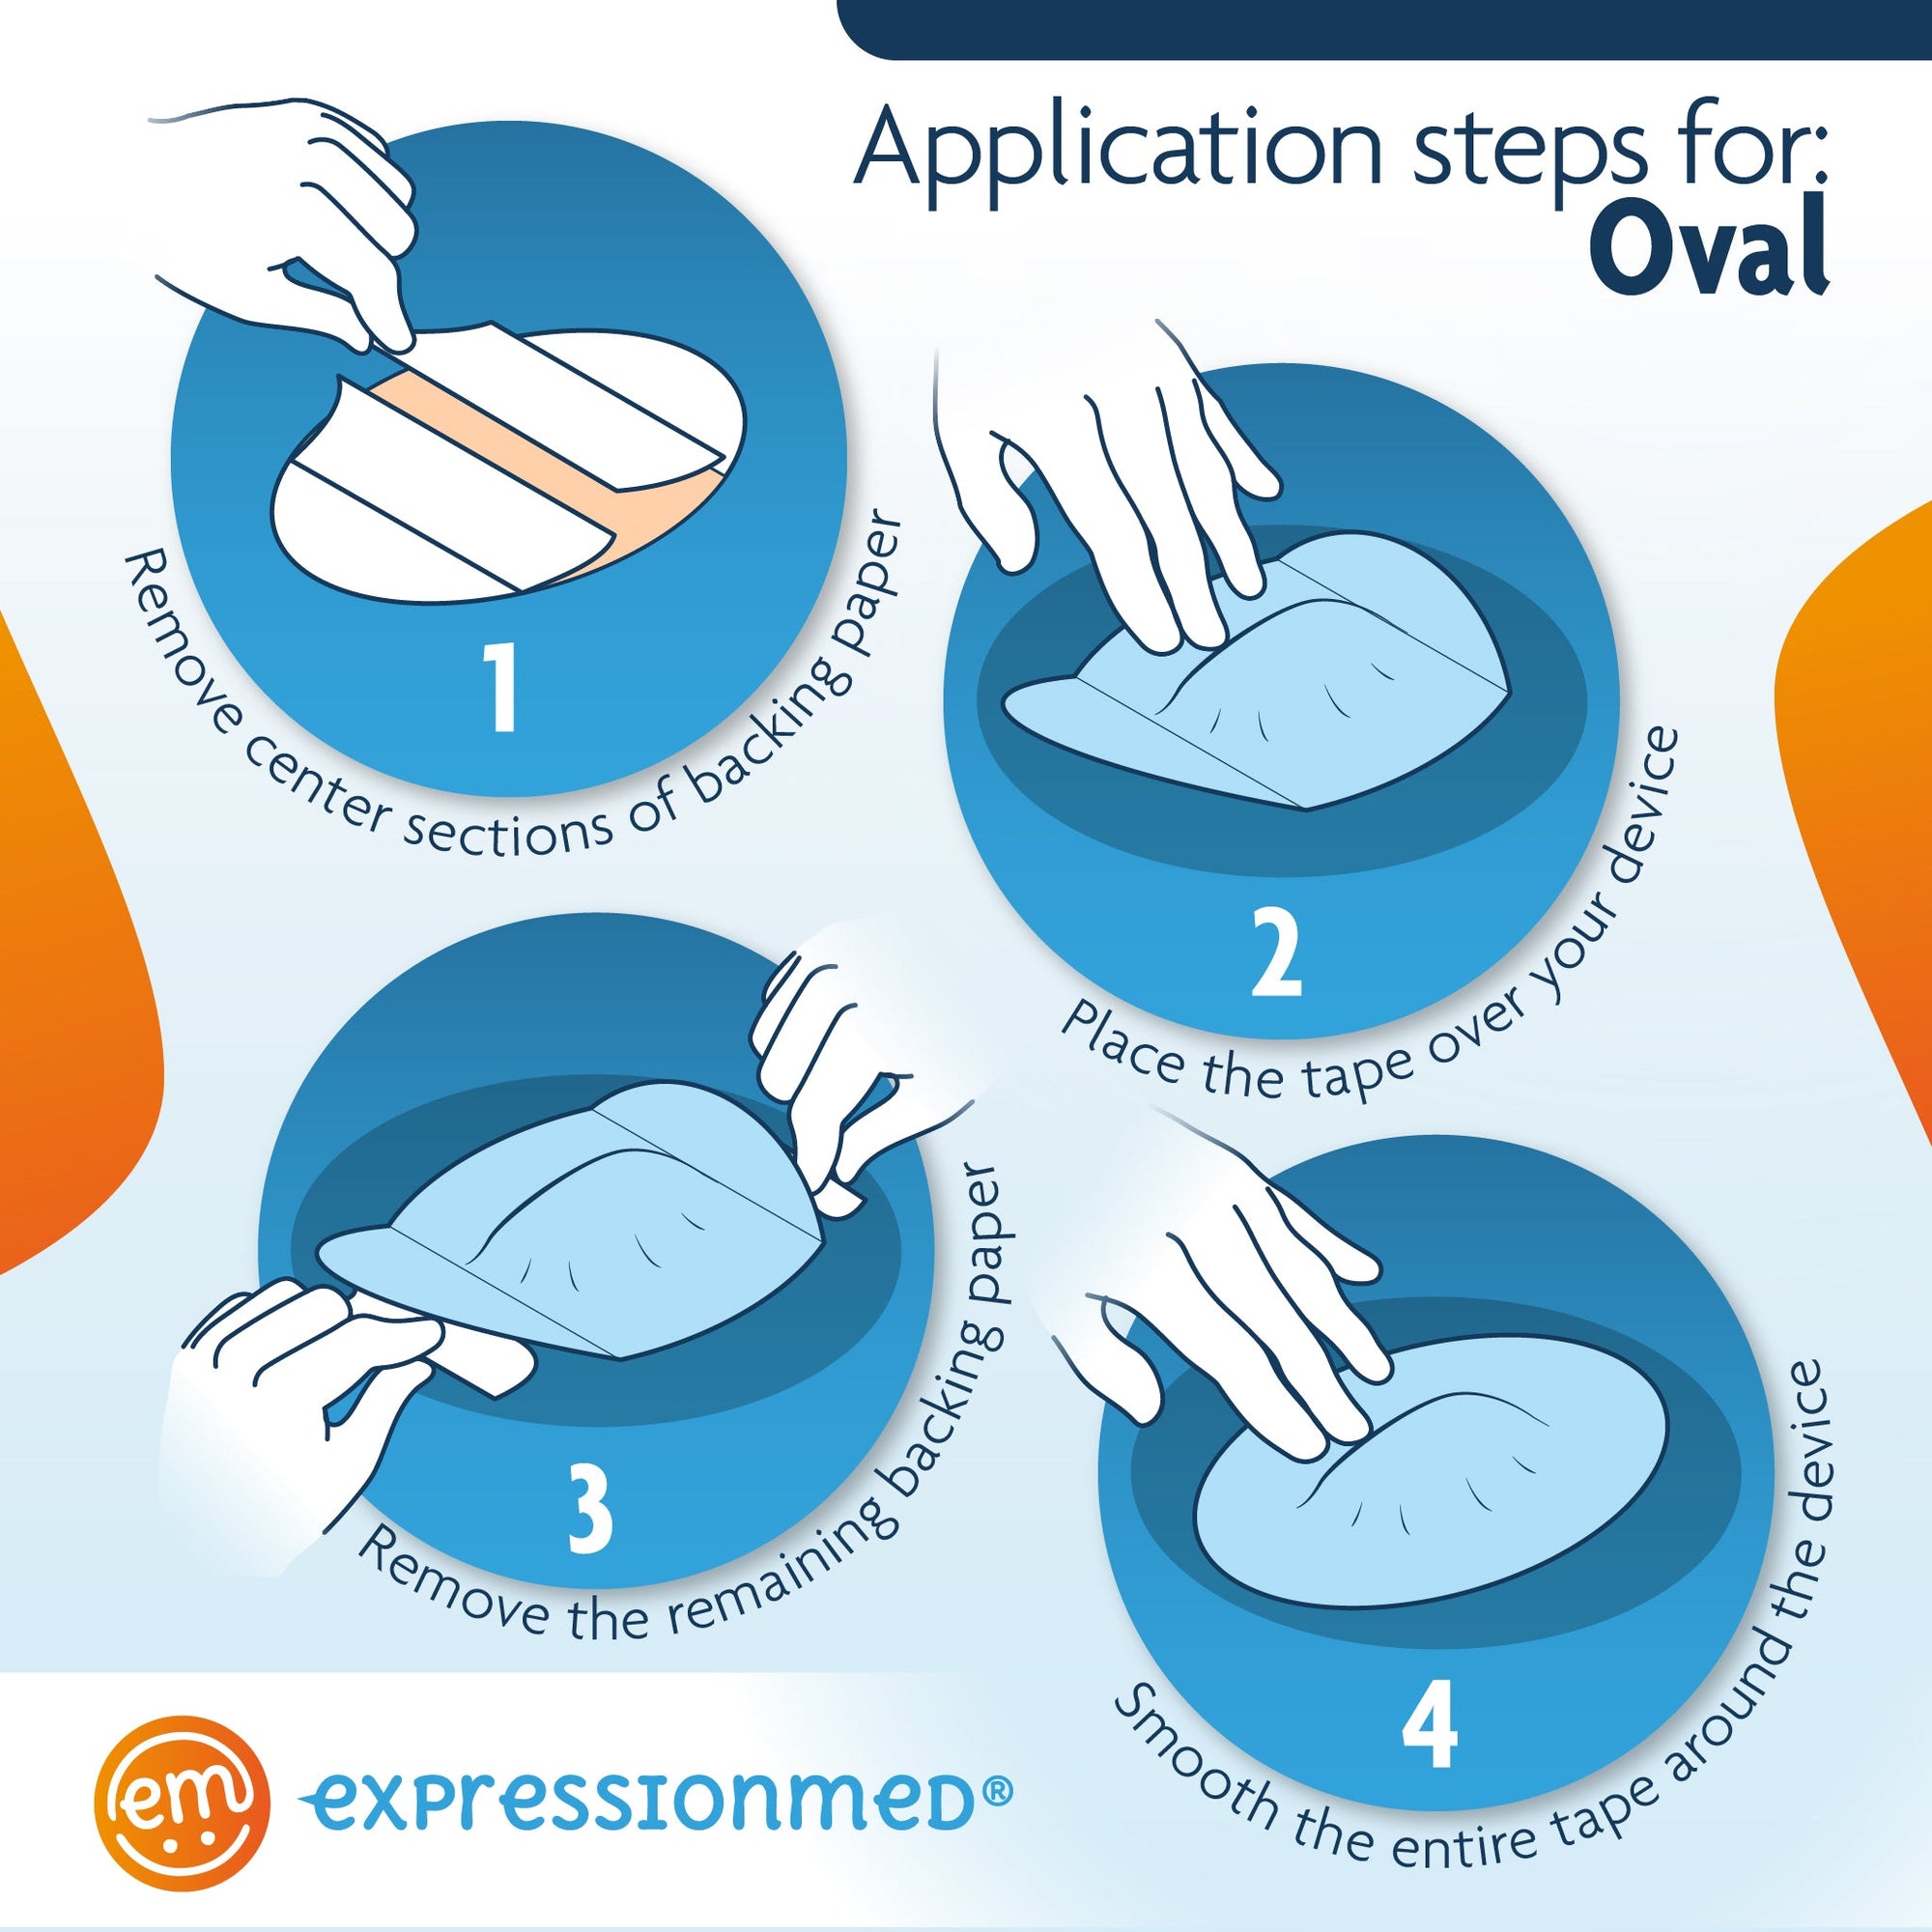 Application Instructions. 1. Prep skin with soap and water. 2. Remove paper Middle Sections and lay center hole over device. 3. Peel off both end sections and smooth down on skin. To remove, hold an edge and stretch material off skin.